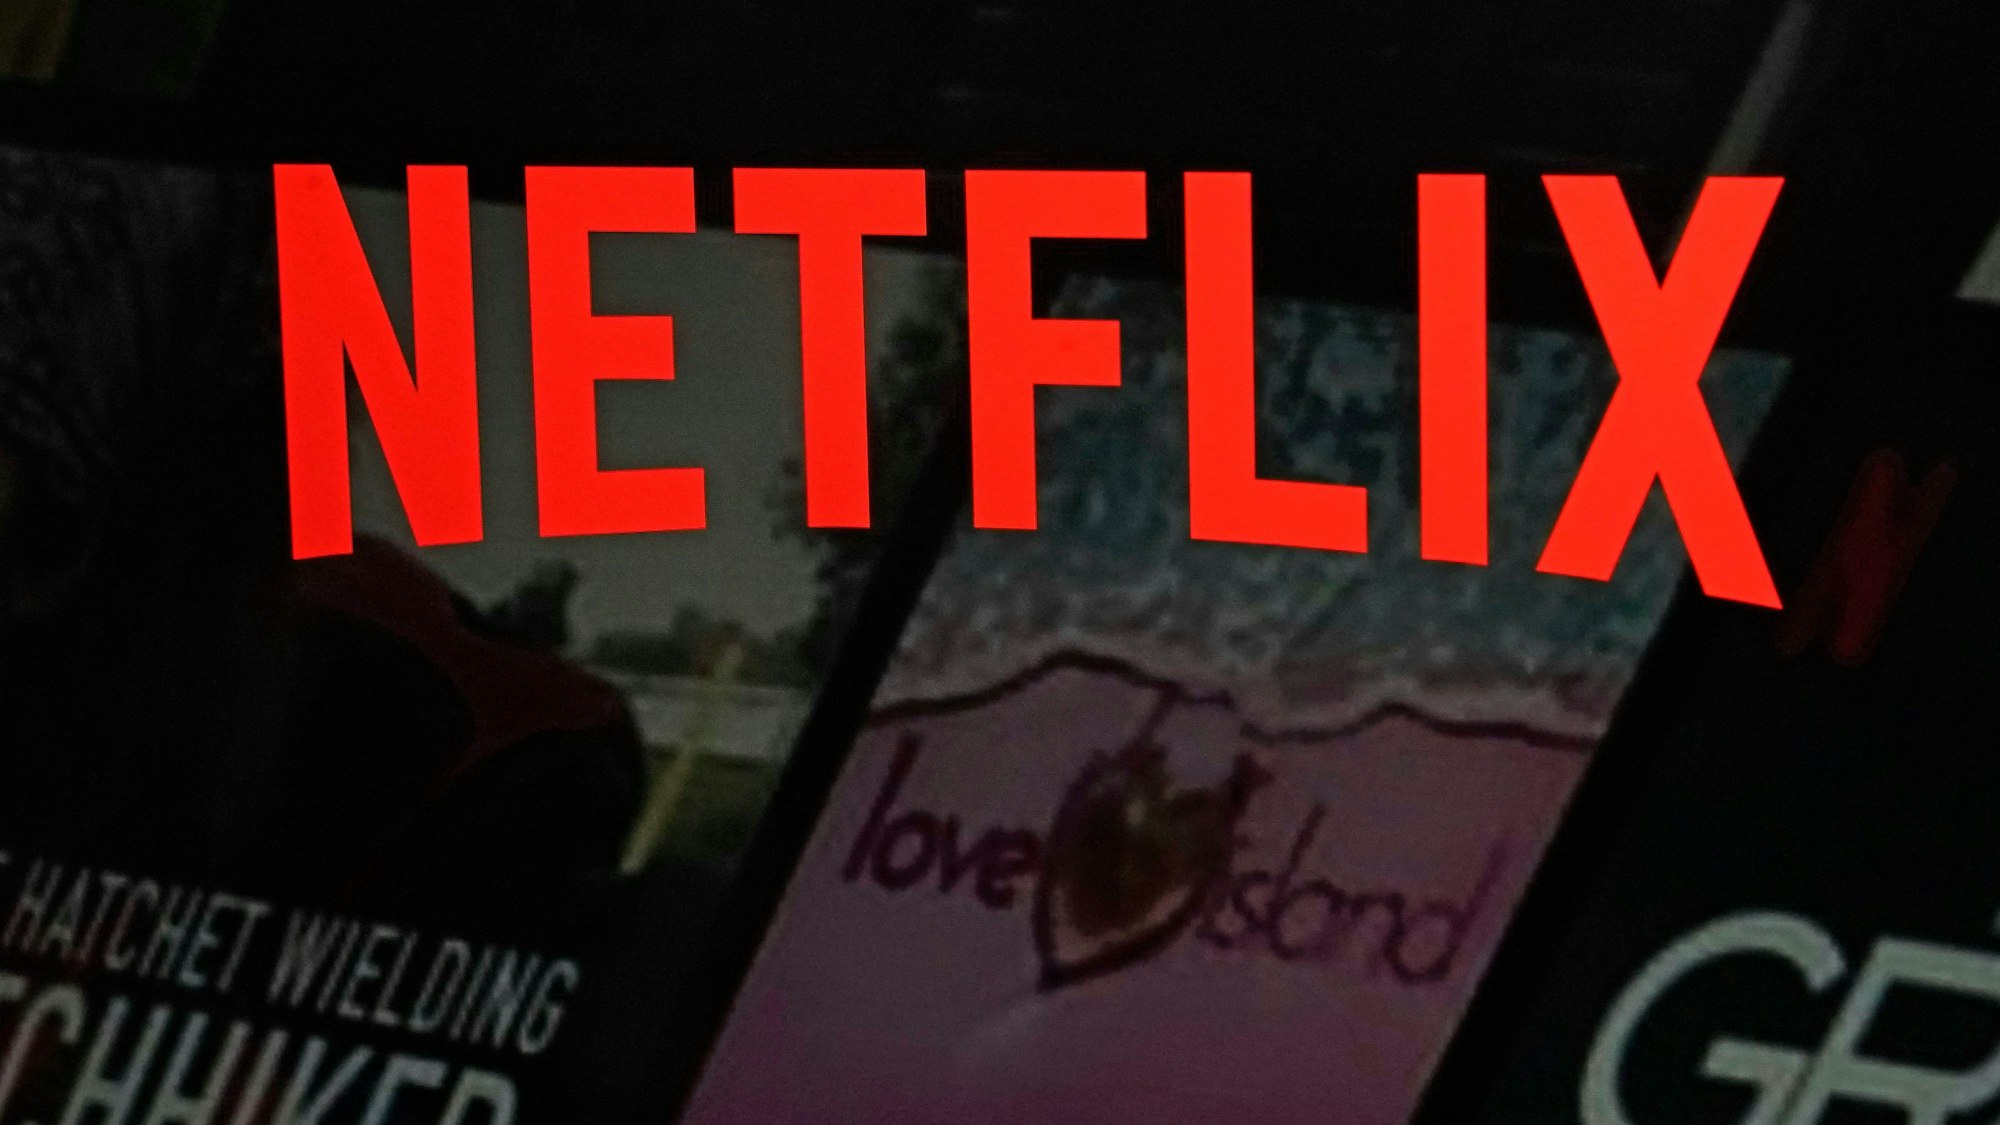 FILE - The Netflix logo is displayed on the company's website on Feb. 2, 2023, in New York. Netflix on Tuesday, May 23, 2023, outlined how it intends to crack down on the rampant sharing of account passwords in the U.S., its latest bid to reel in more subscribers to its video streaming service amid a slowdown in growth. (AP Photo/Richard Drew, File)